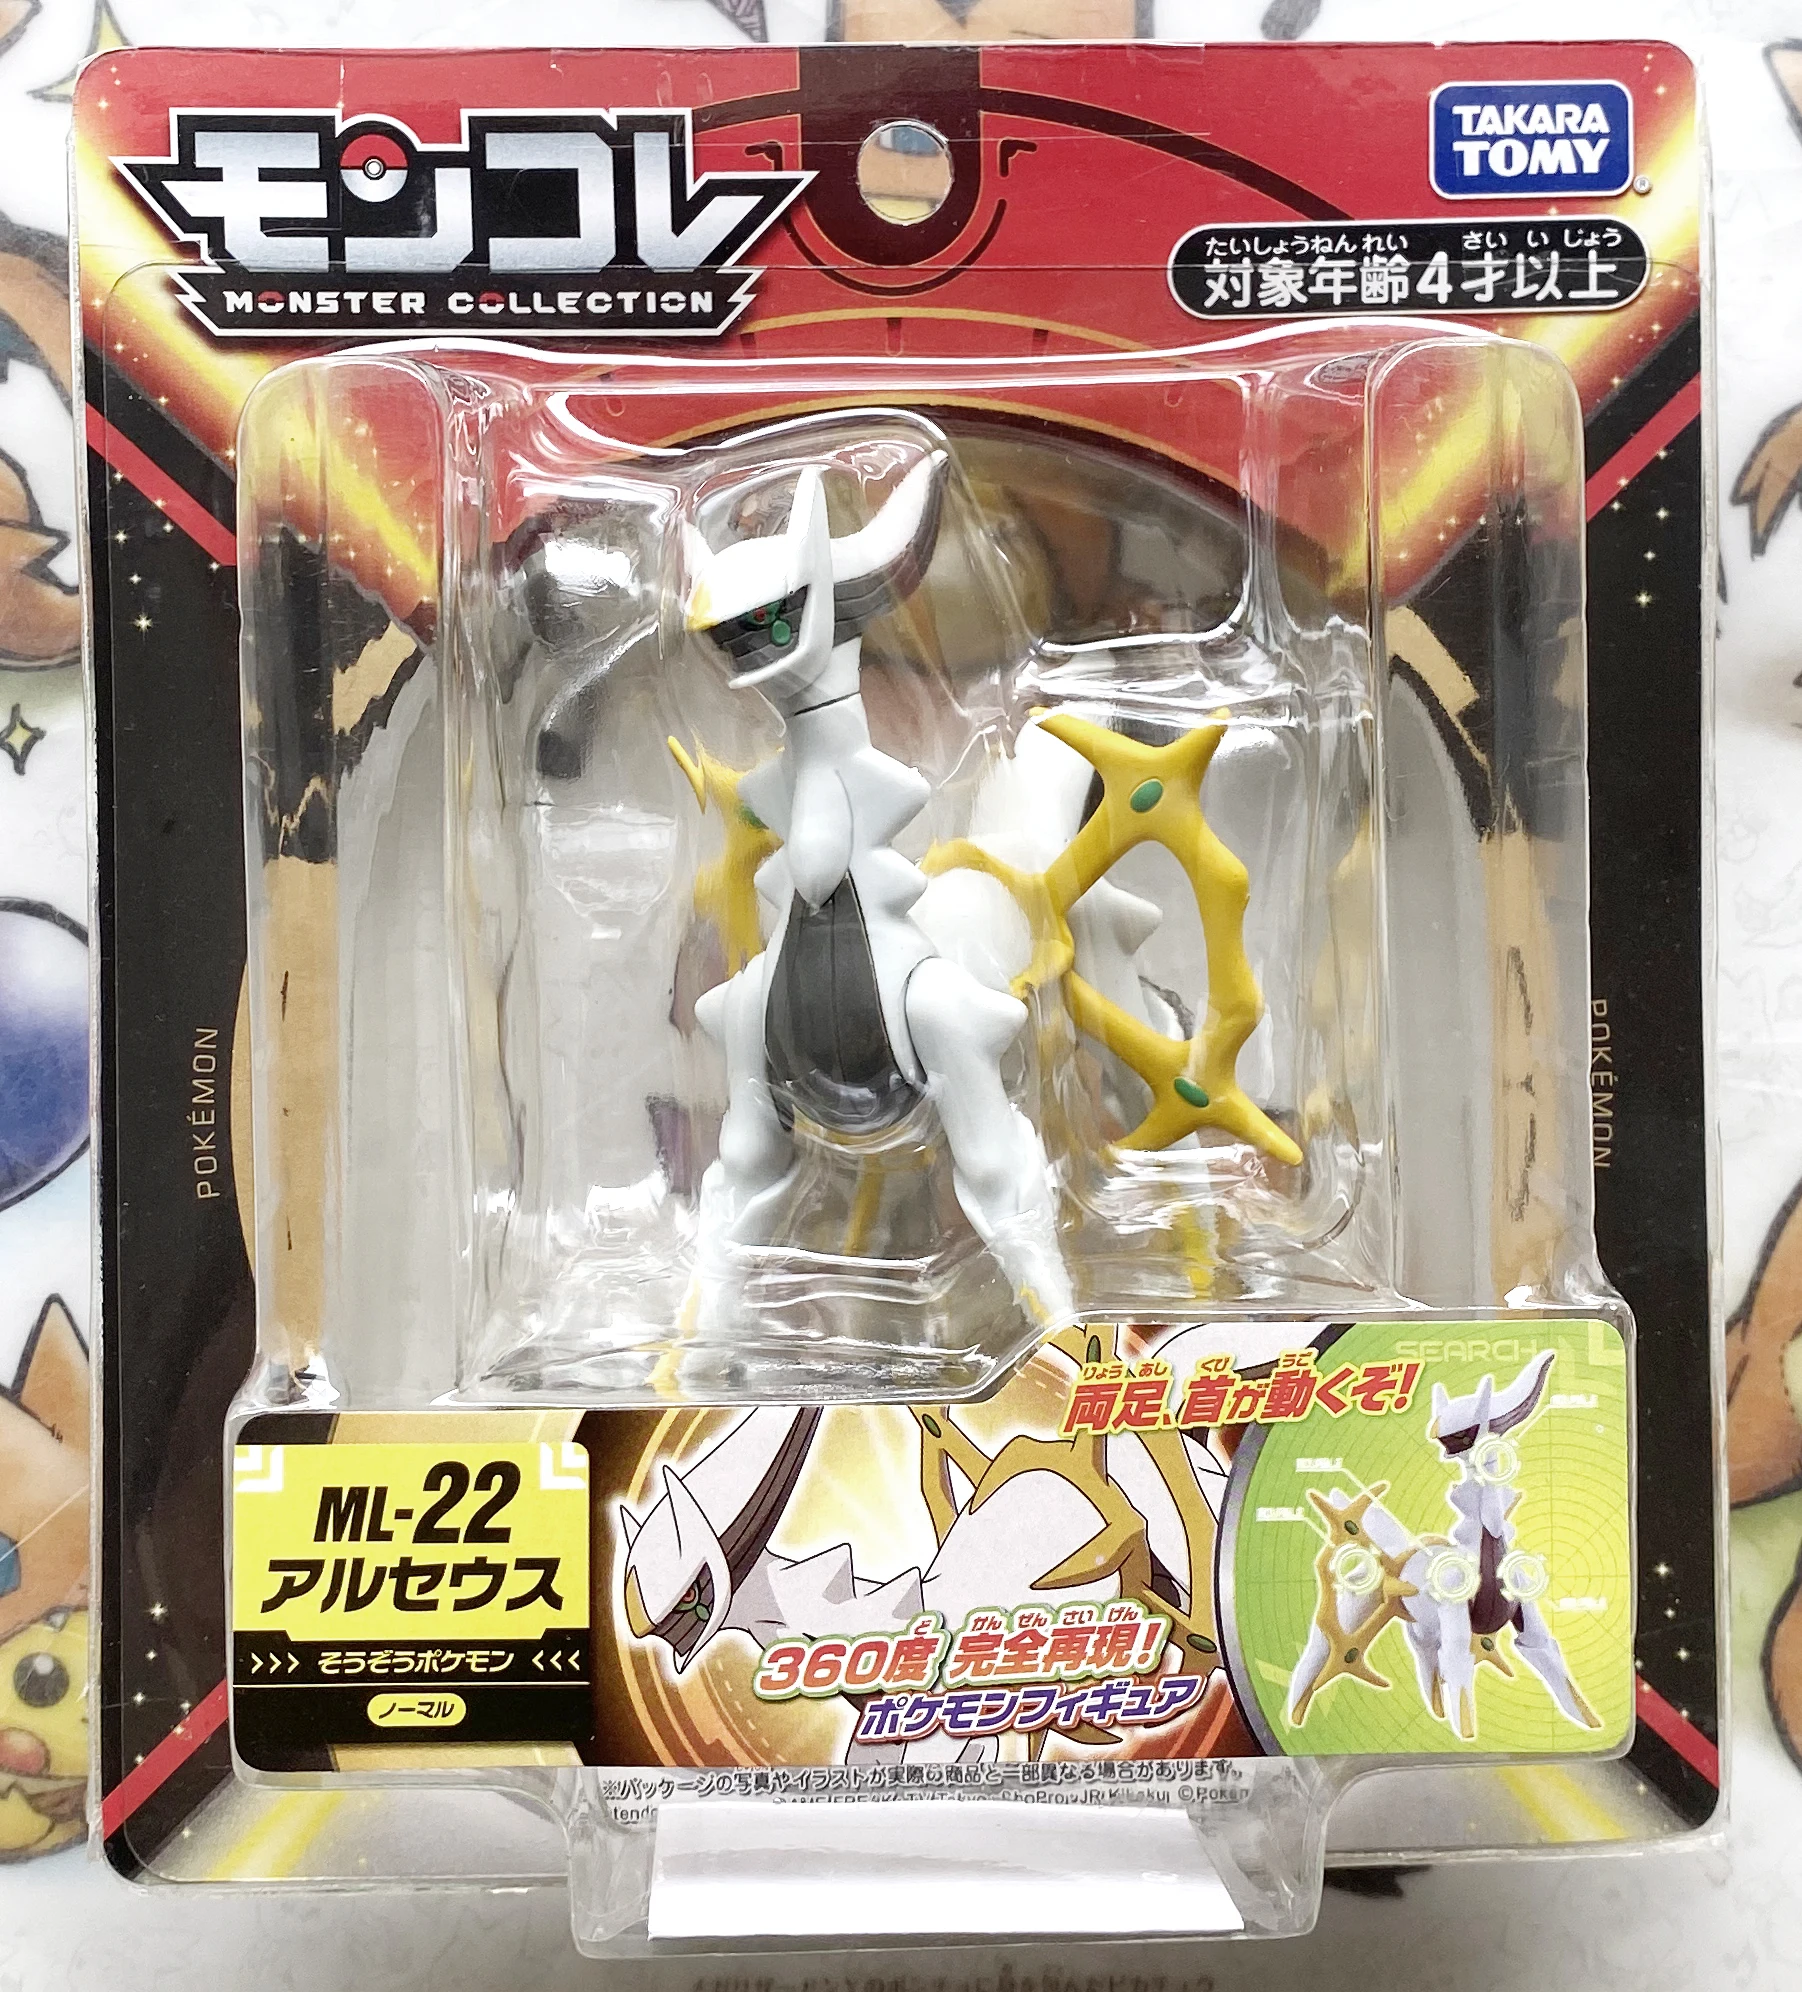 

TAKARA TOMY Genuine Pokemon MC Sword and Shield ML-22 Arceus EHP Out-of-print Limited Rare Action Figure Model Toys